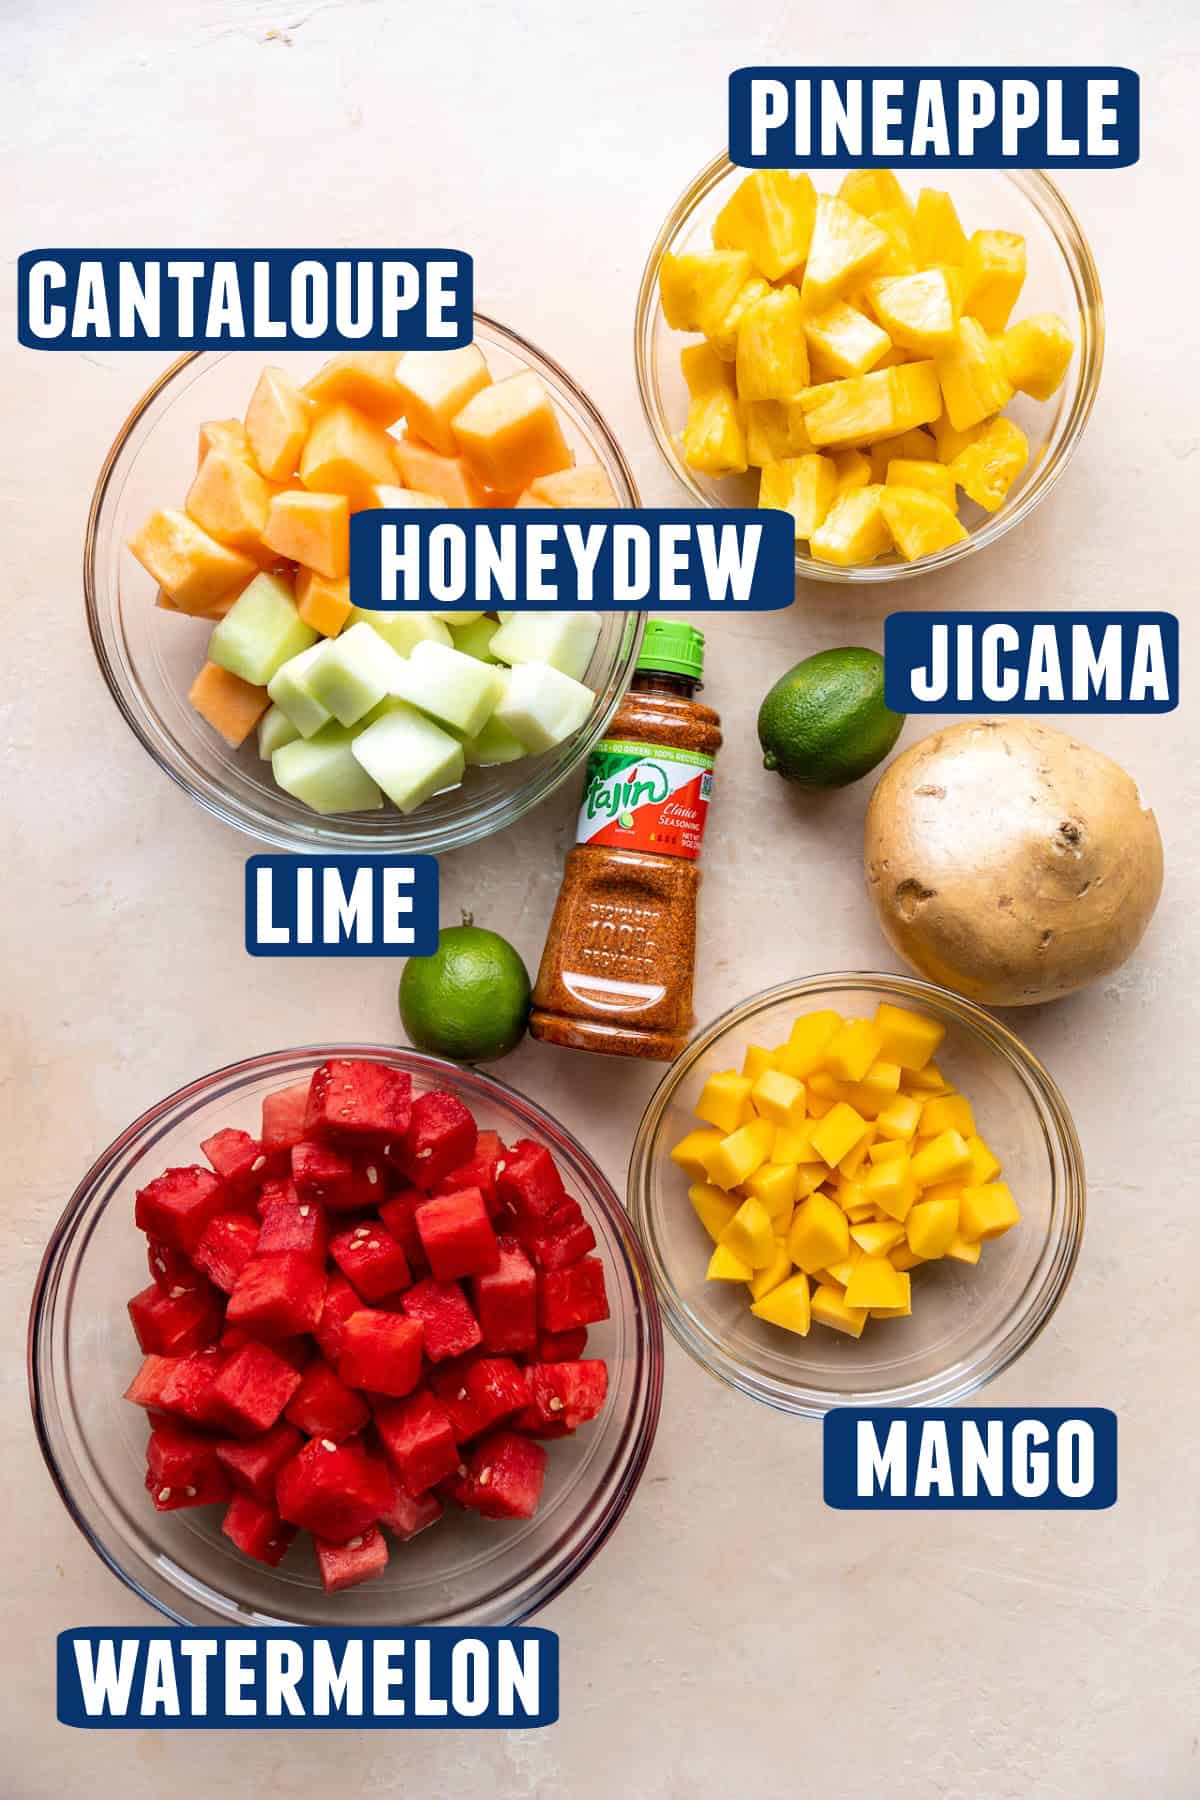 Ingredients needed to make a mexican fruit salad laid on the counter, bowls of chopped watermelon, mango, honeydew, cantaloupe, pineapple, a whole jicama, limes and bottle of Tajin.